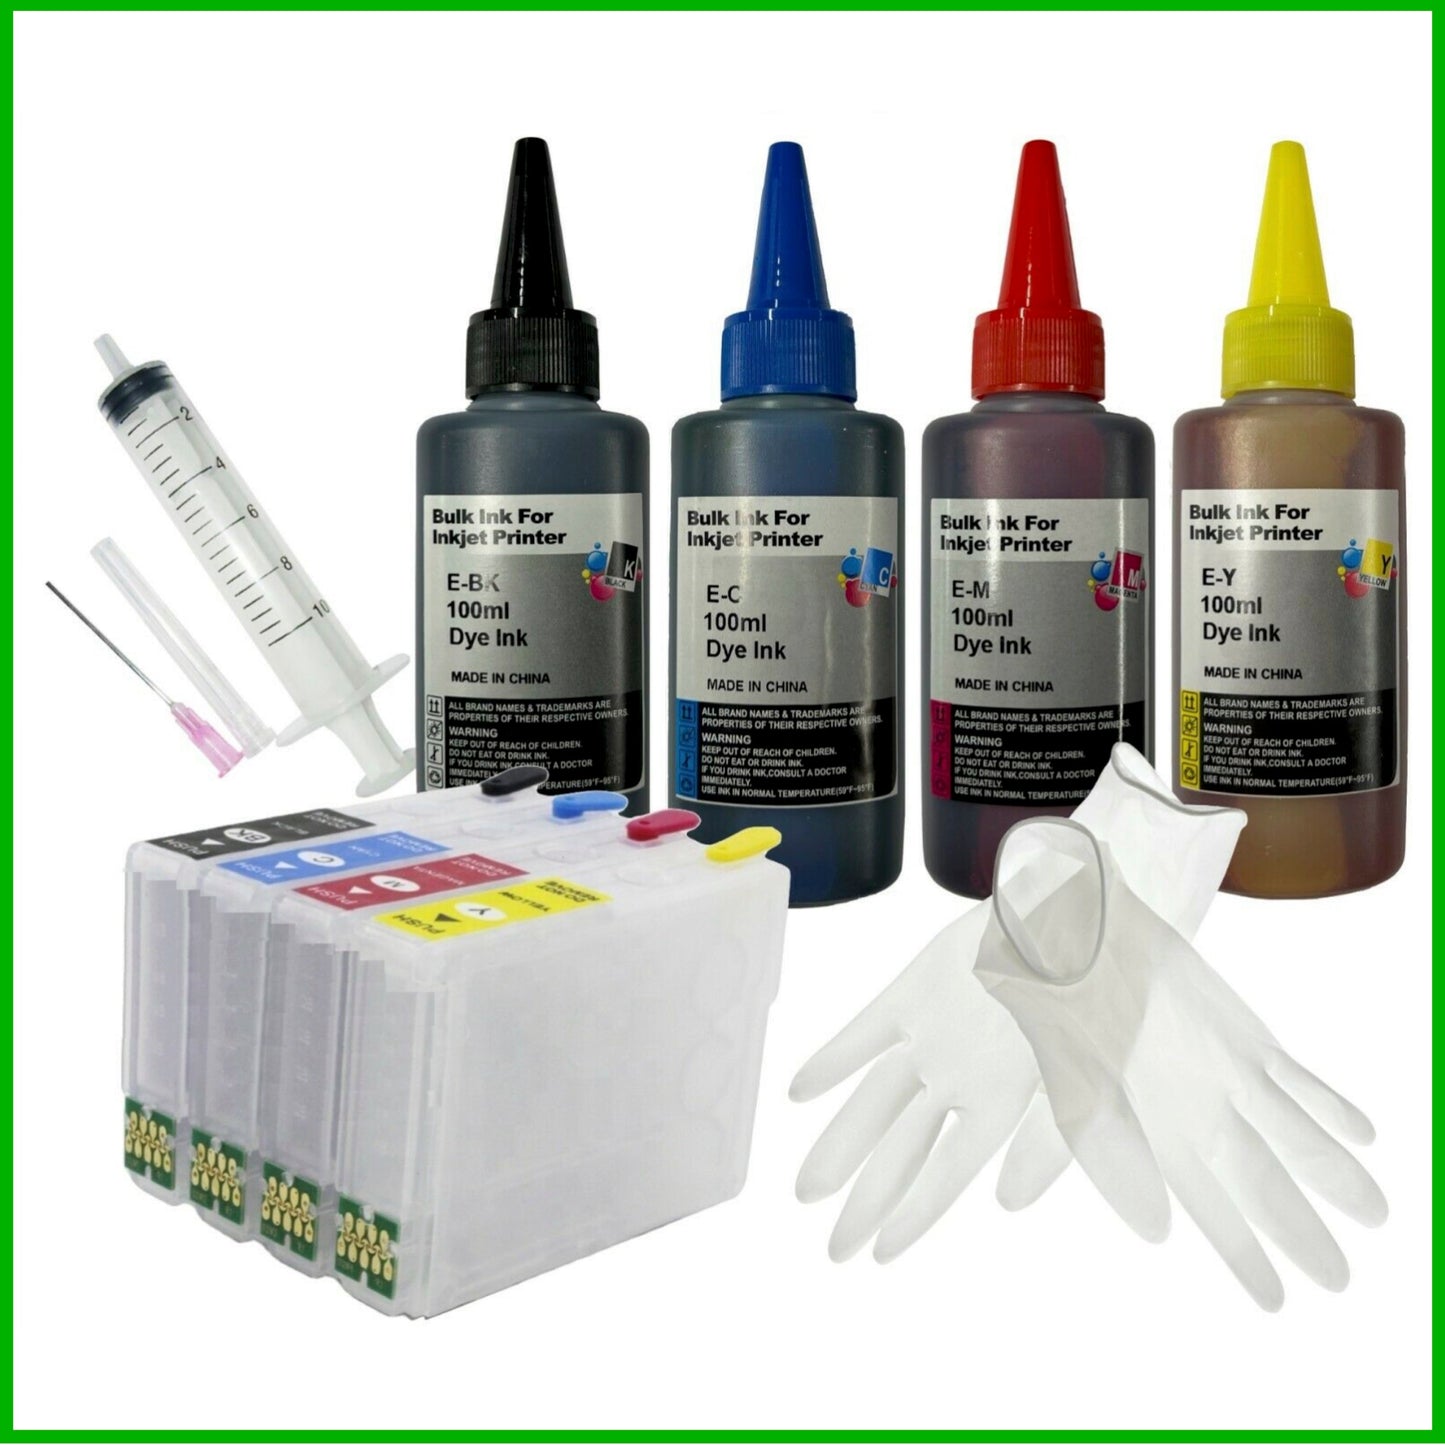 Refill Starter Kit - 16XL Cartridges with ARC Chip & Ink for Epson WorkForce